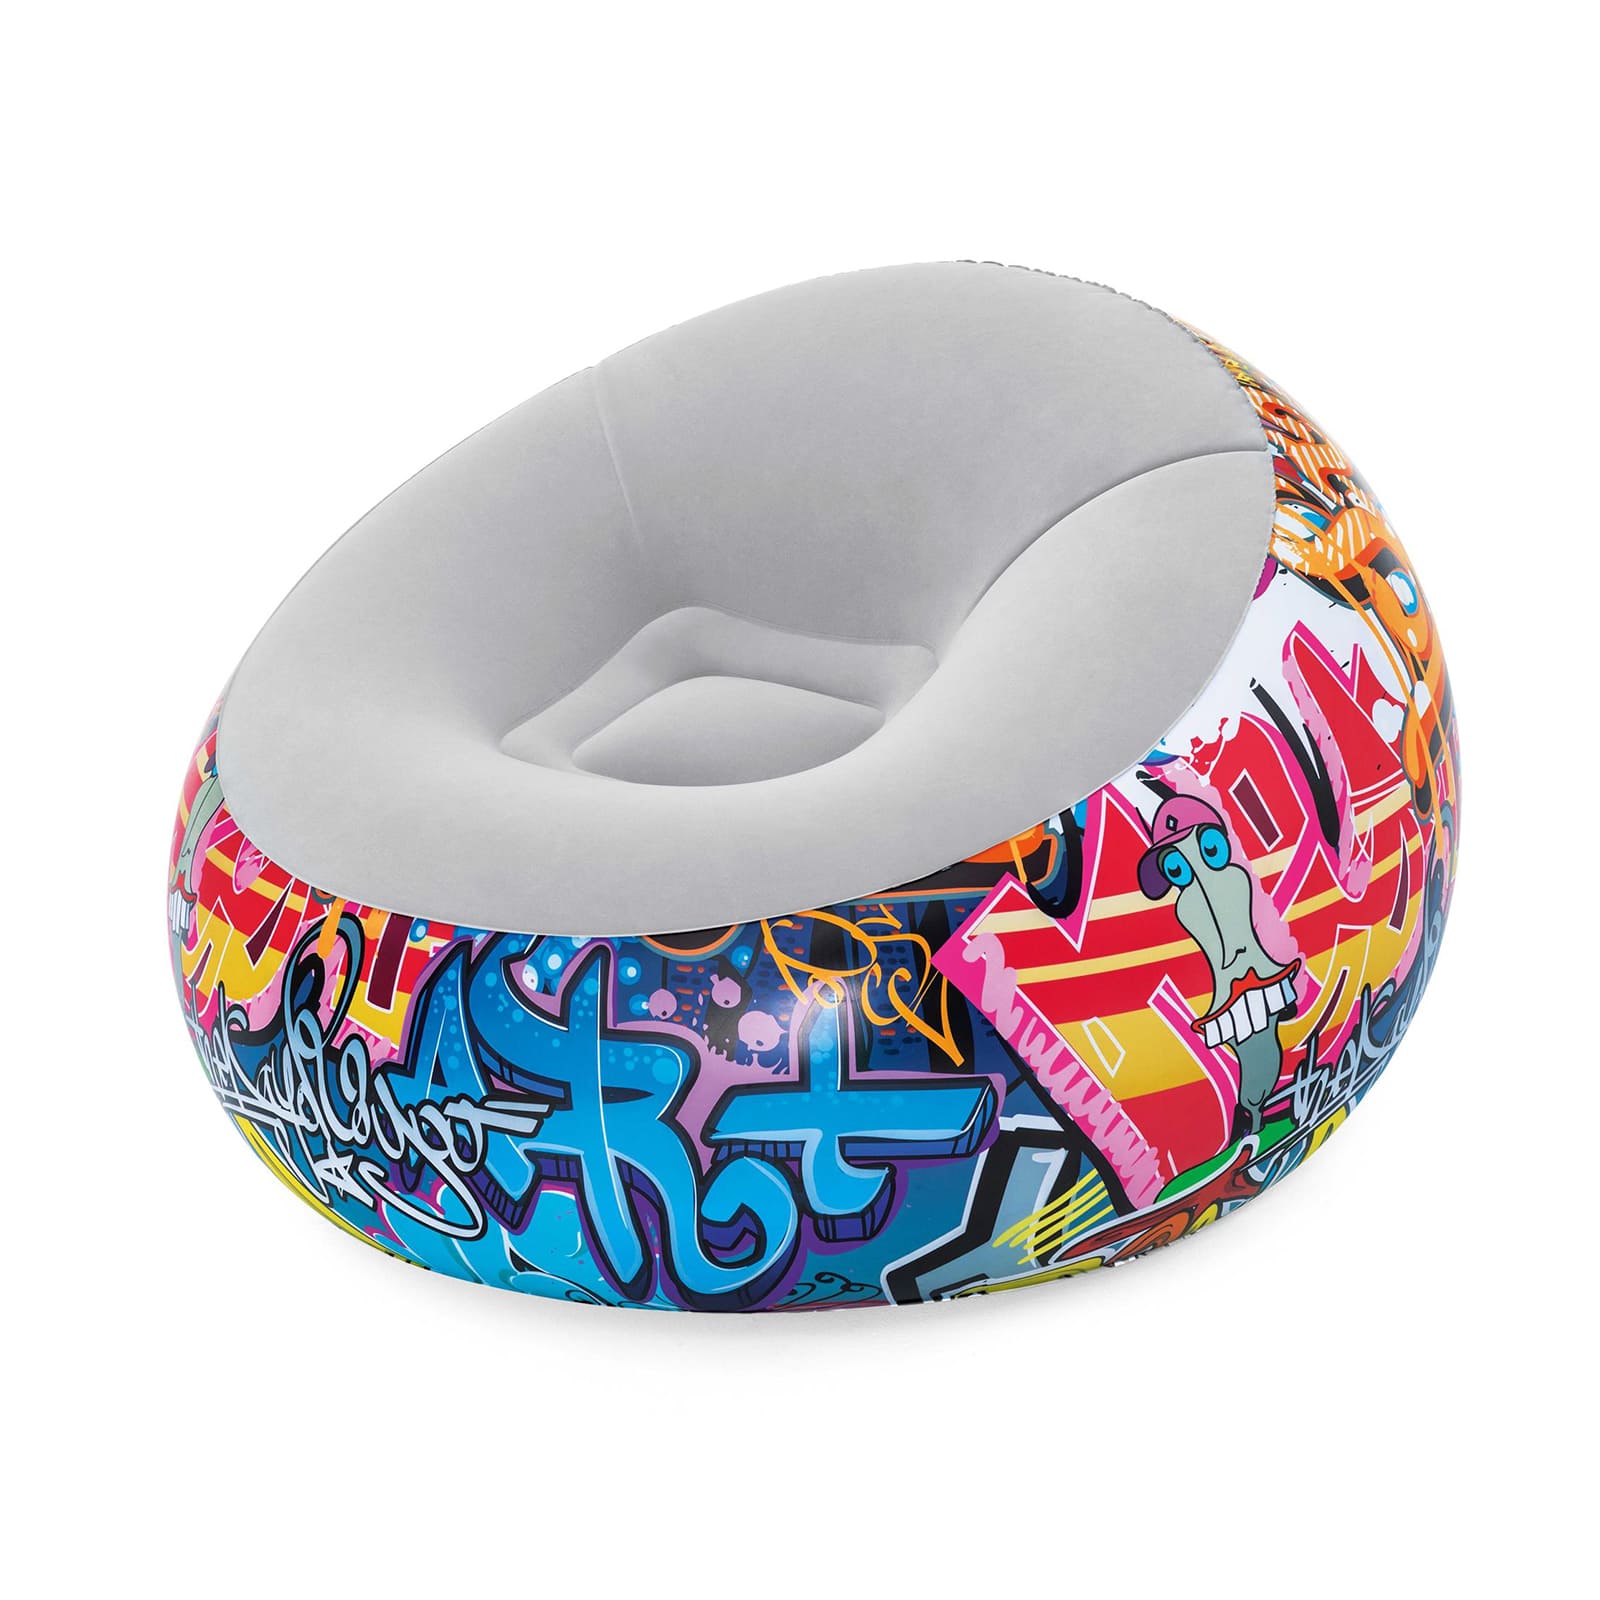 Sillón inflable Graffiti Inflate-A-Chair de Bestway